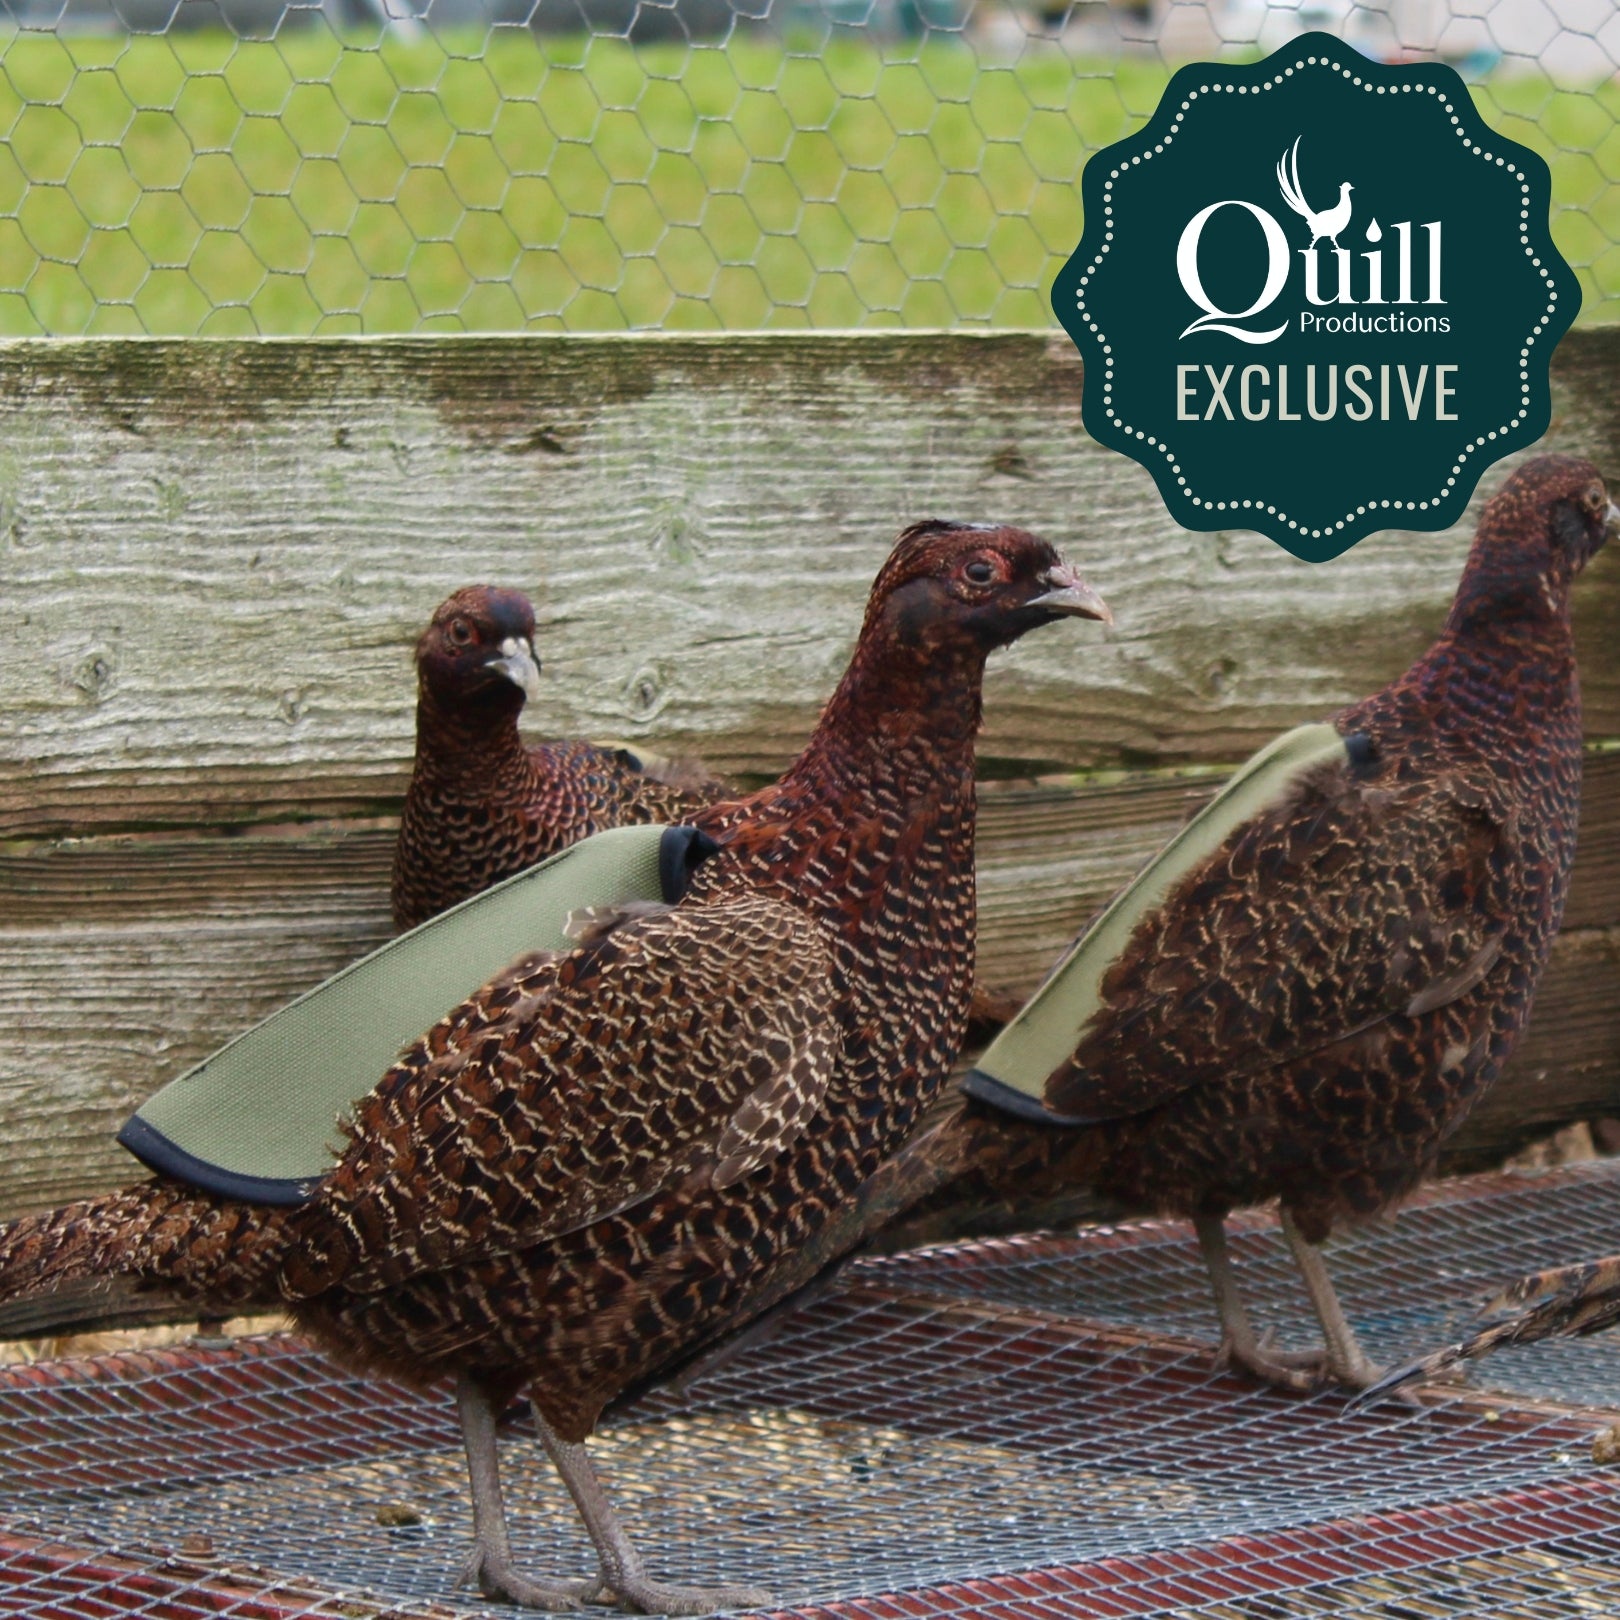 Quill Long Pheasant Saddle